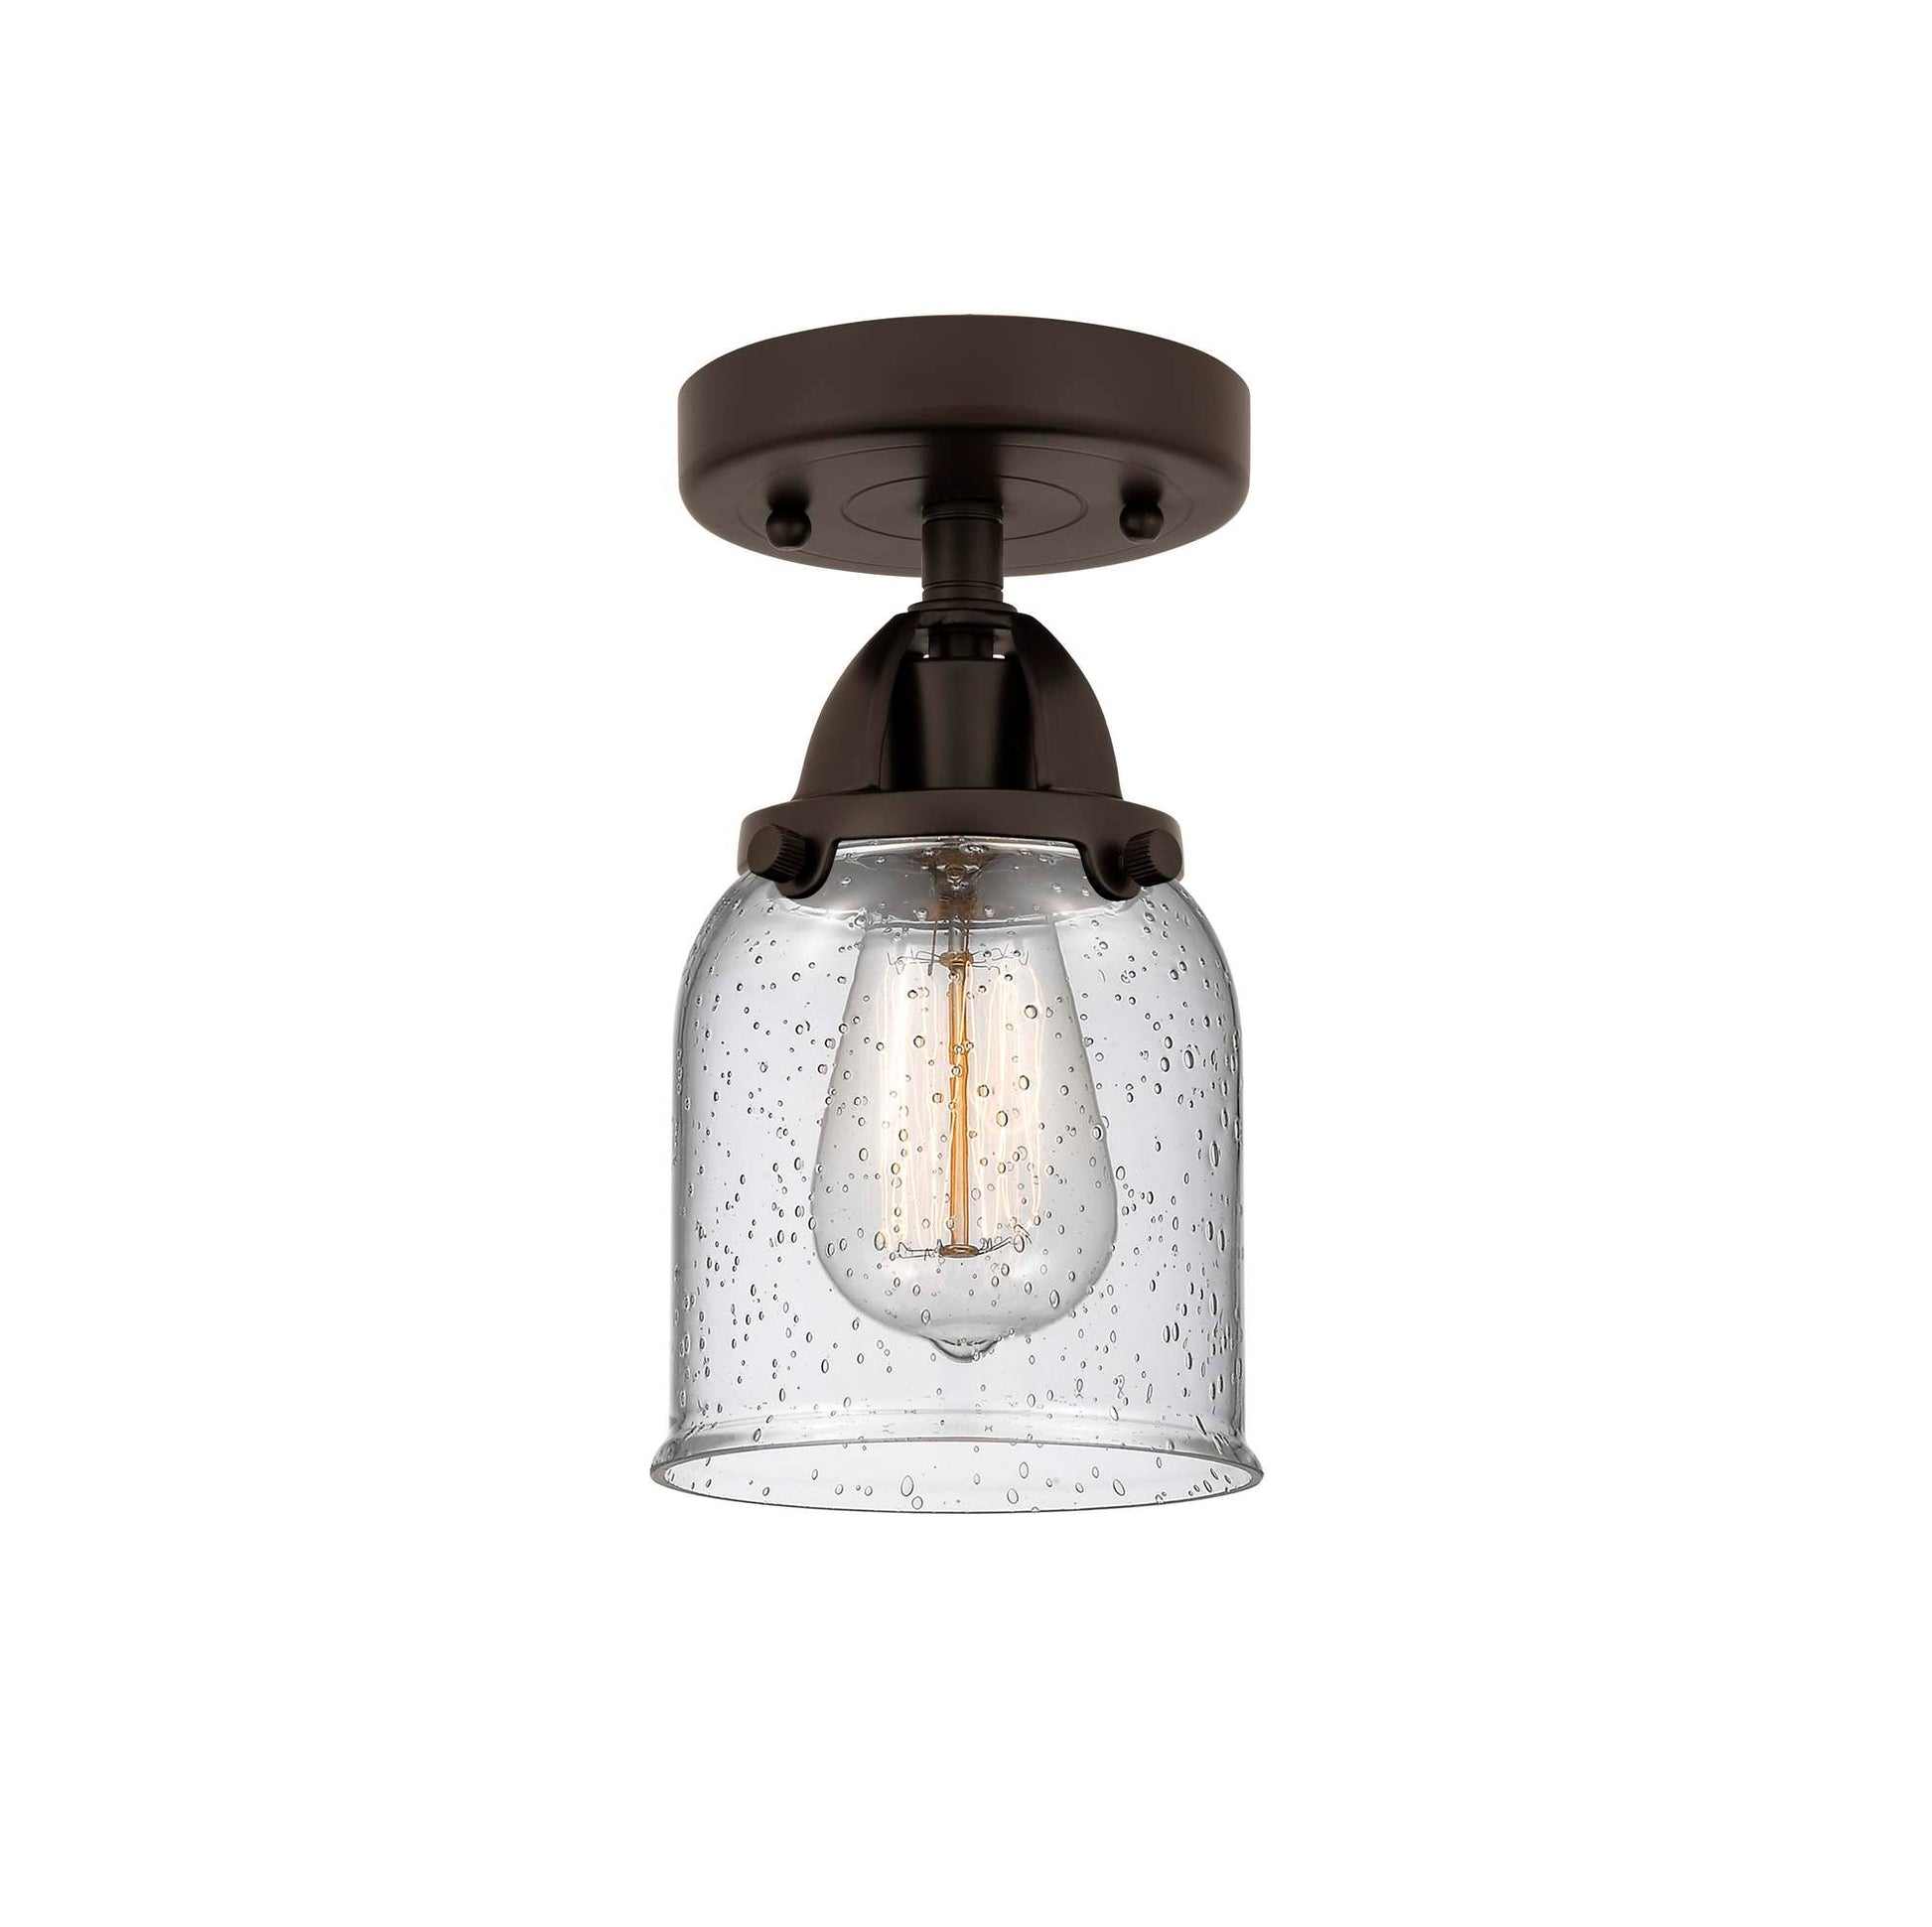 288-1C-OB-G54 1-Light 5" Oil Rubbed Bronze Semi-Flush Mount - Seedy Small Bell Glass - LED Bulb - Dimmensions: 5 x 5 x 9.25 - Sloped Ceiling Compatible: No